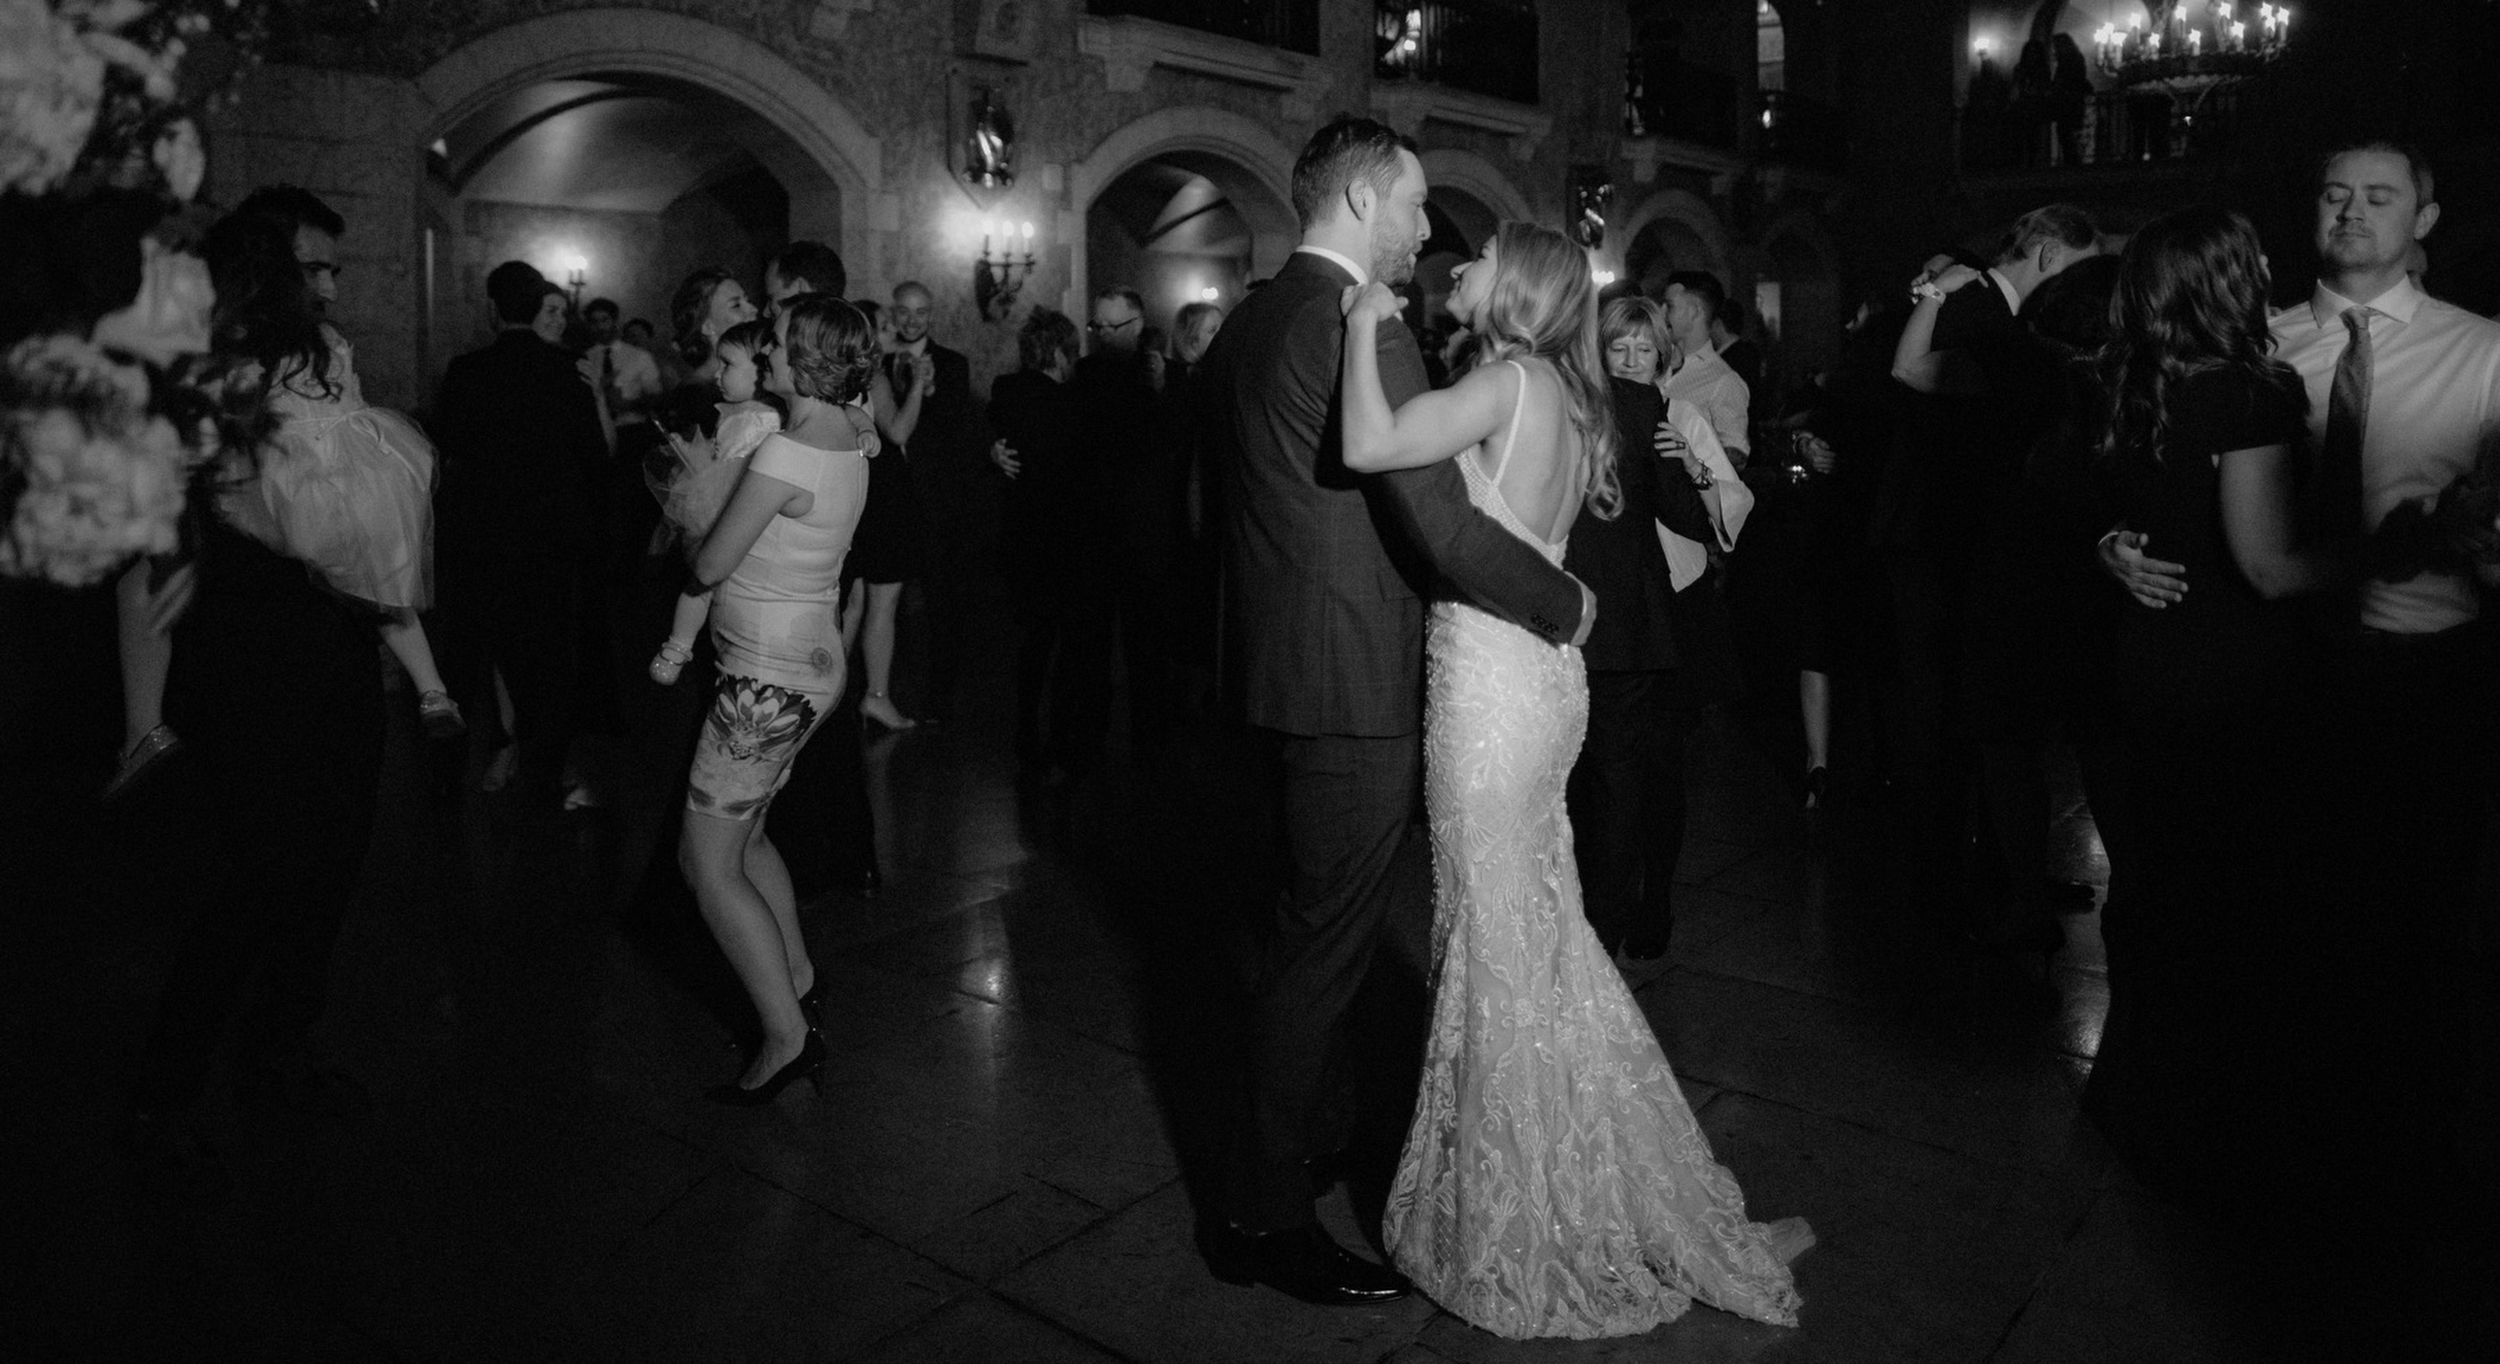 Bride and groom dancing amongst their guests in a chandelier lit stone hall